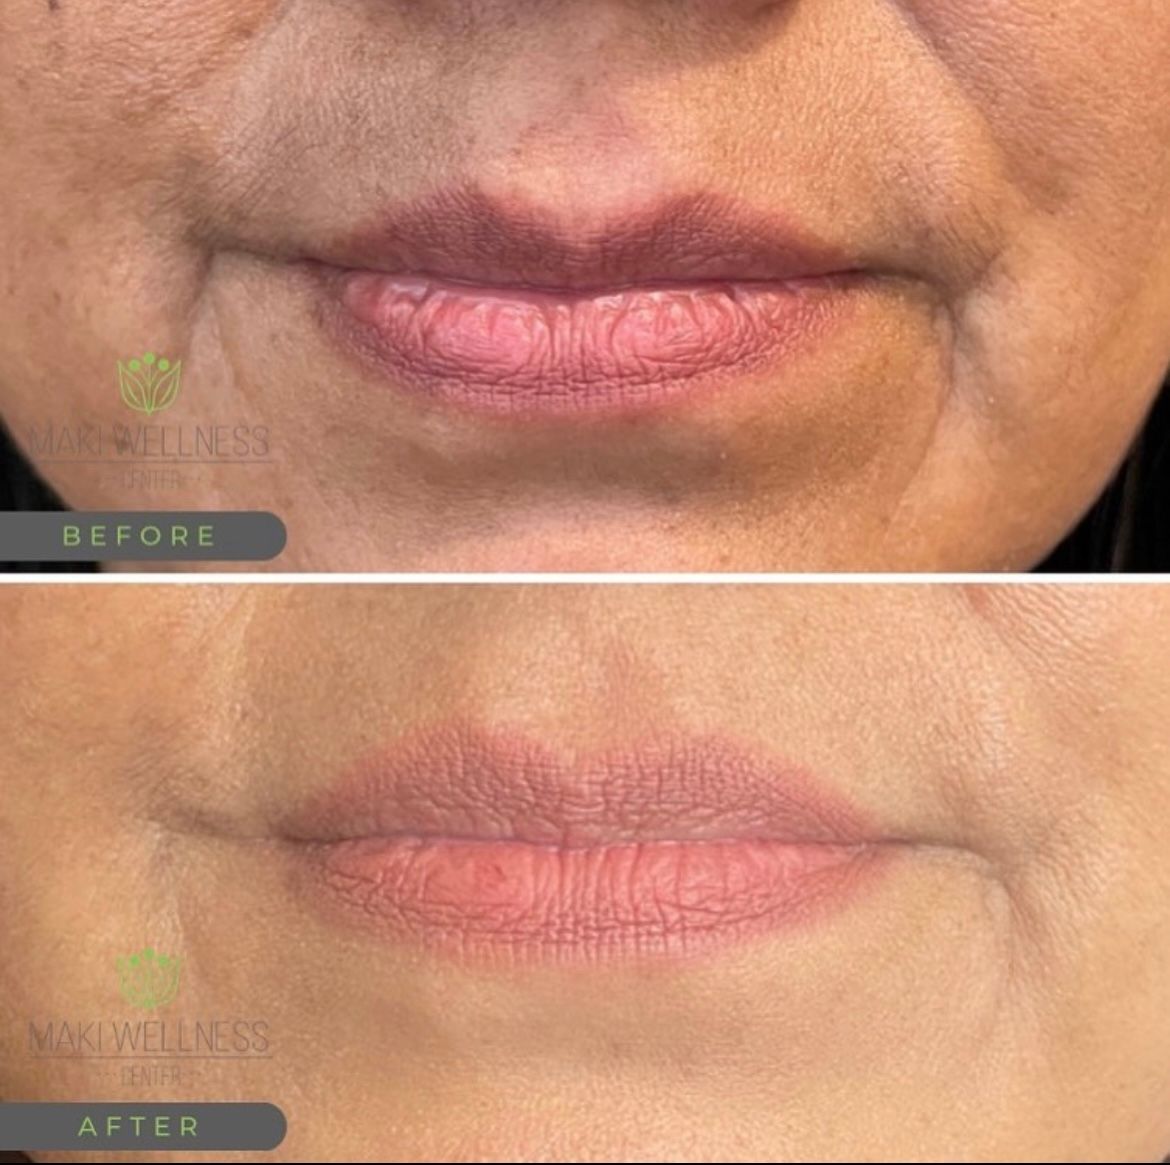 JUVÉDERM before and after